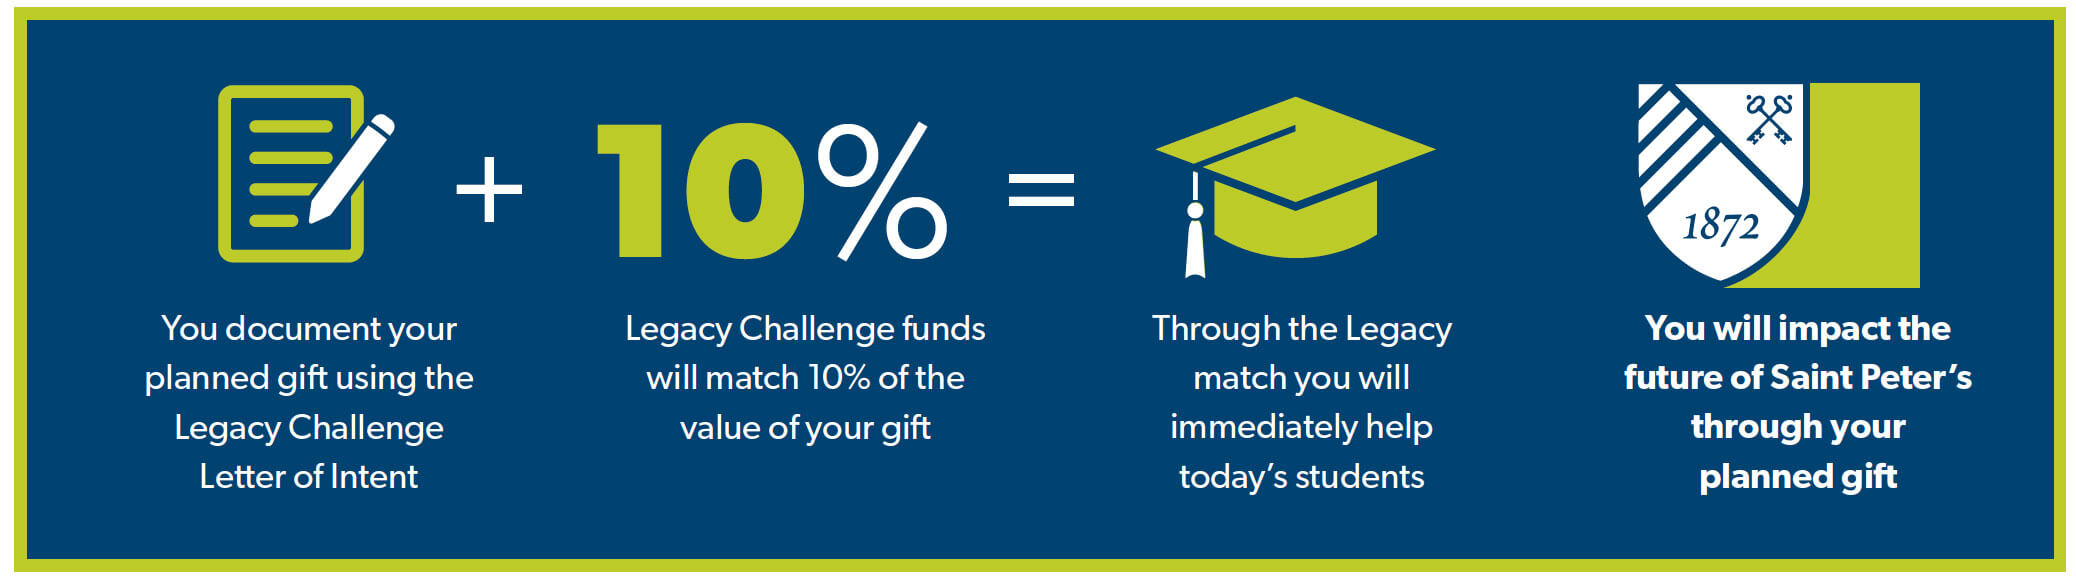 You document your planned gift using the Legacy Challenge Letter of Intent + Legacy Challenge funds will match 10% of the value of your gift = Through the Legacy match you will immediately help todays students x You will impact the future of Saint Peters through your planned gift